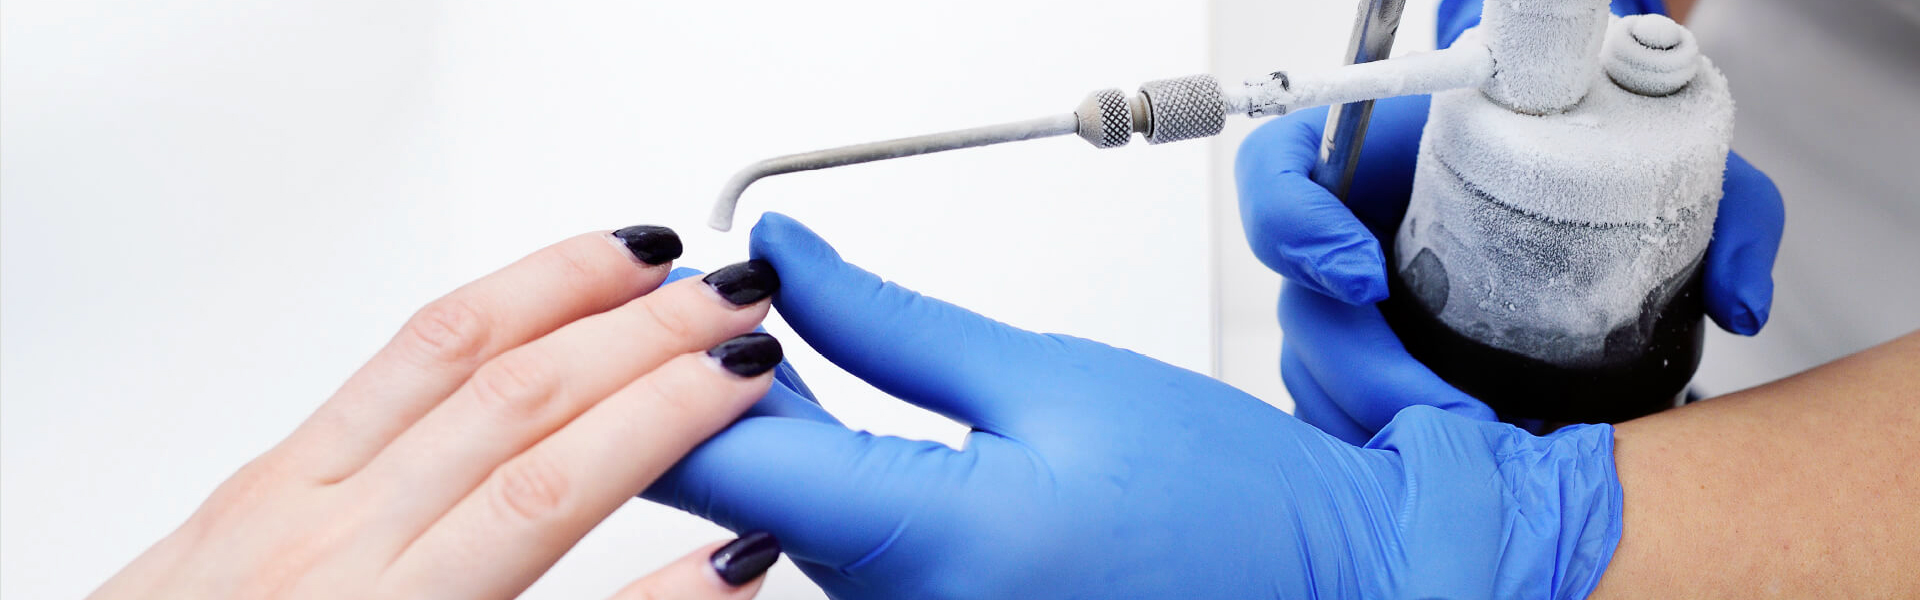 Explaining Cryosurgery and Why Is It Performed?